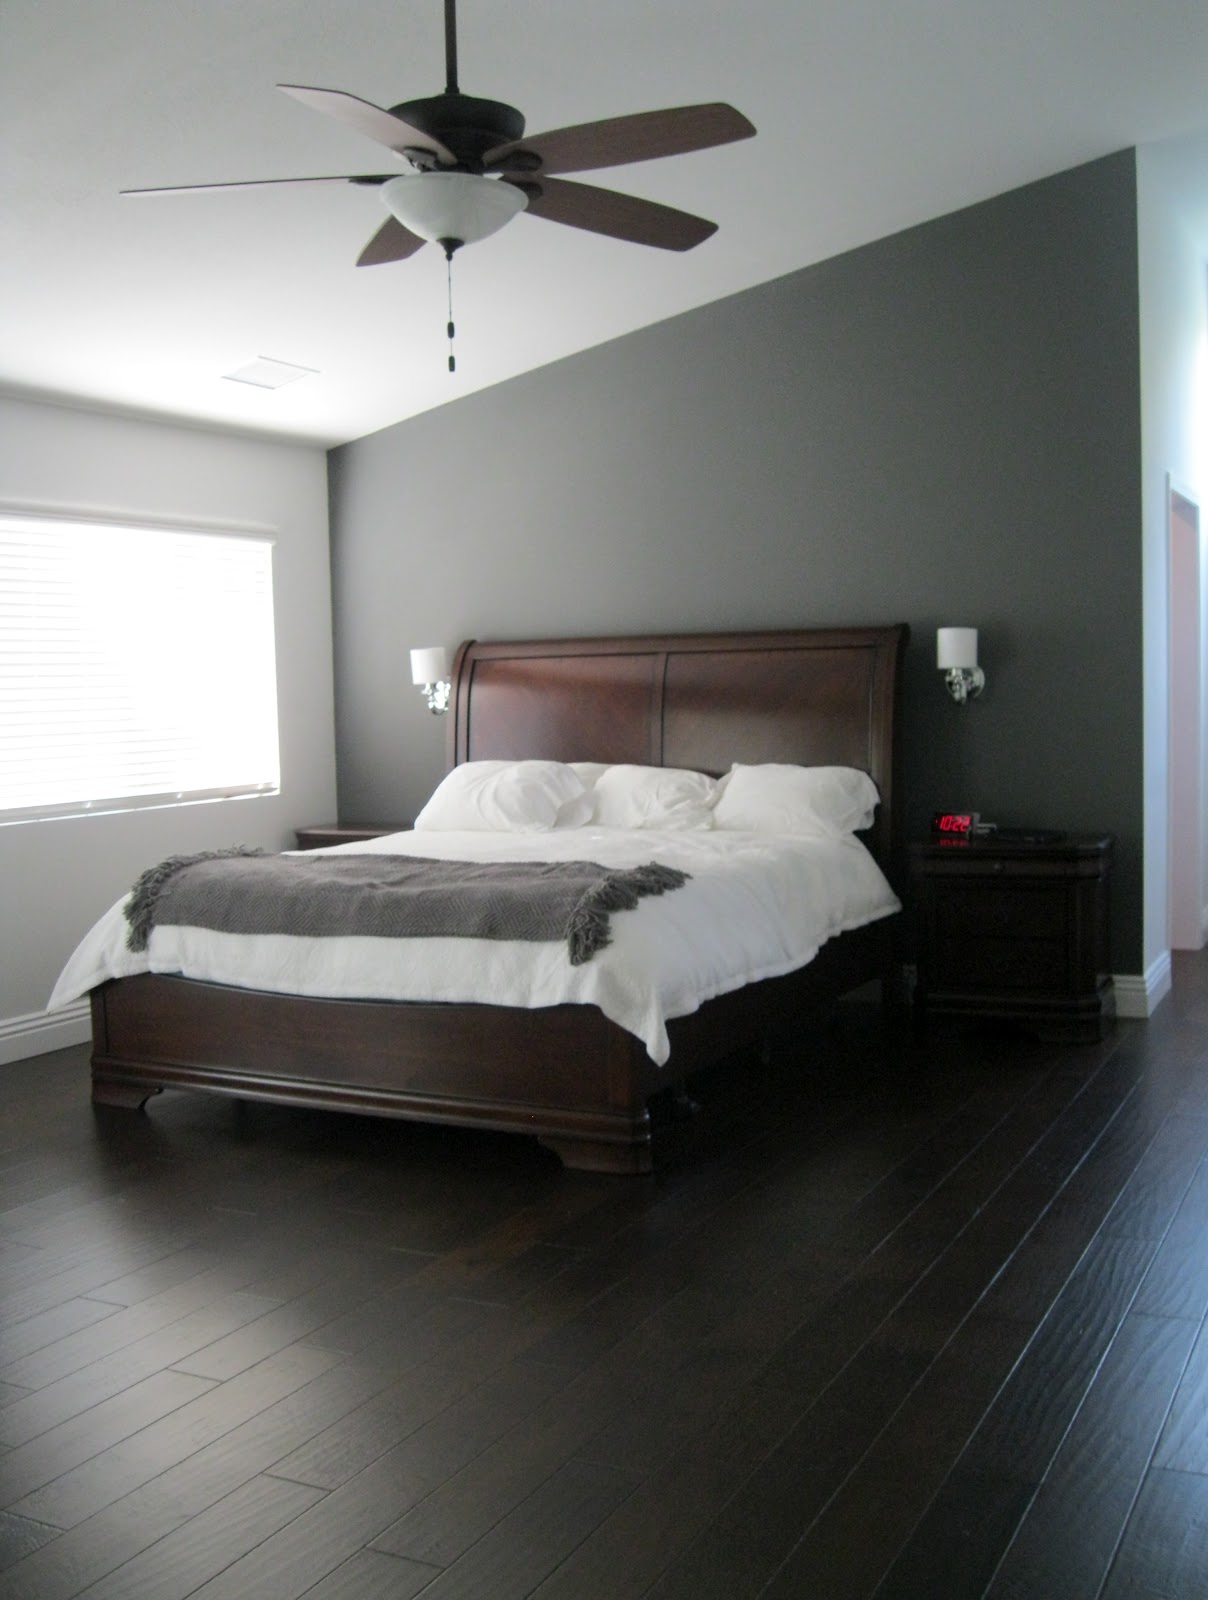 C B I D HOME DECOR  and DESIGN  CHARCOAL GRAY  MASTER SUITE